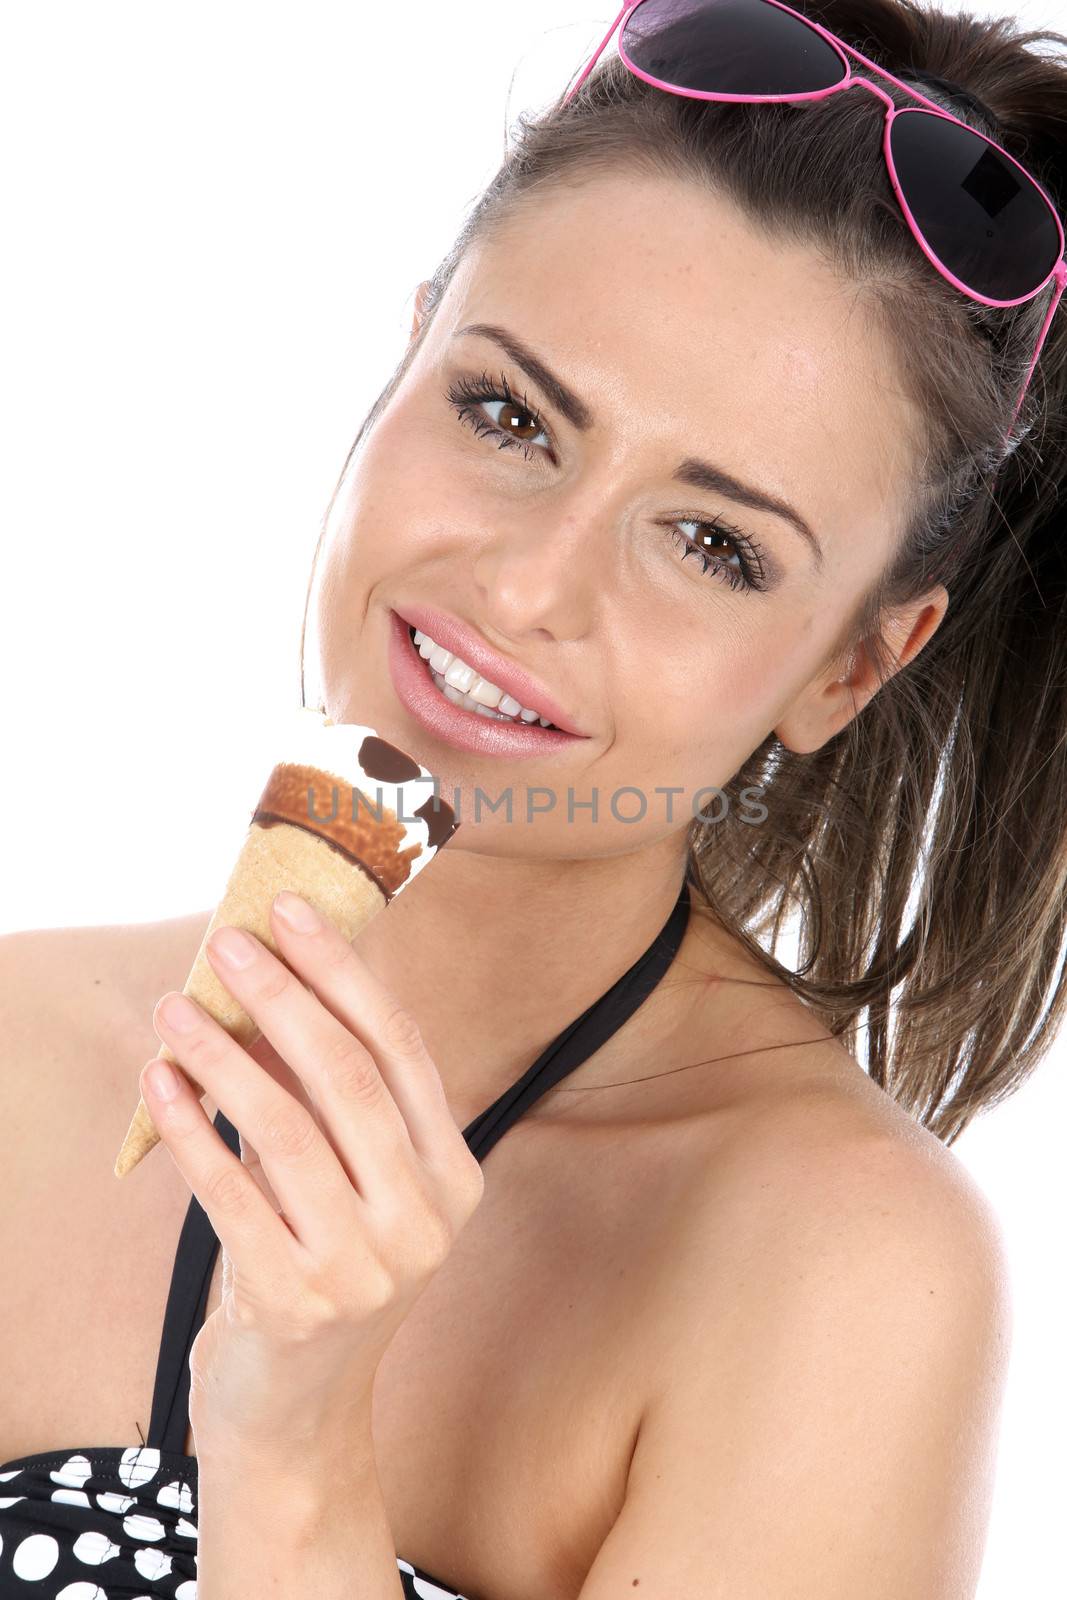 Model Released. Woman Eating a Cornetto Ice Cream by Whiteboxmedia